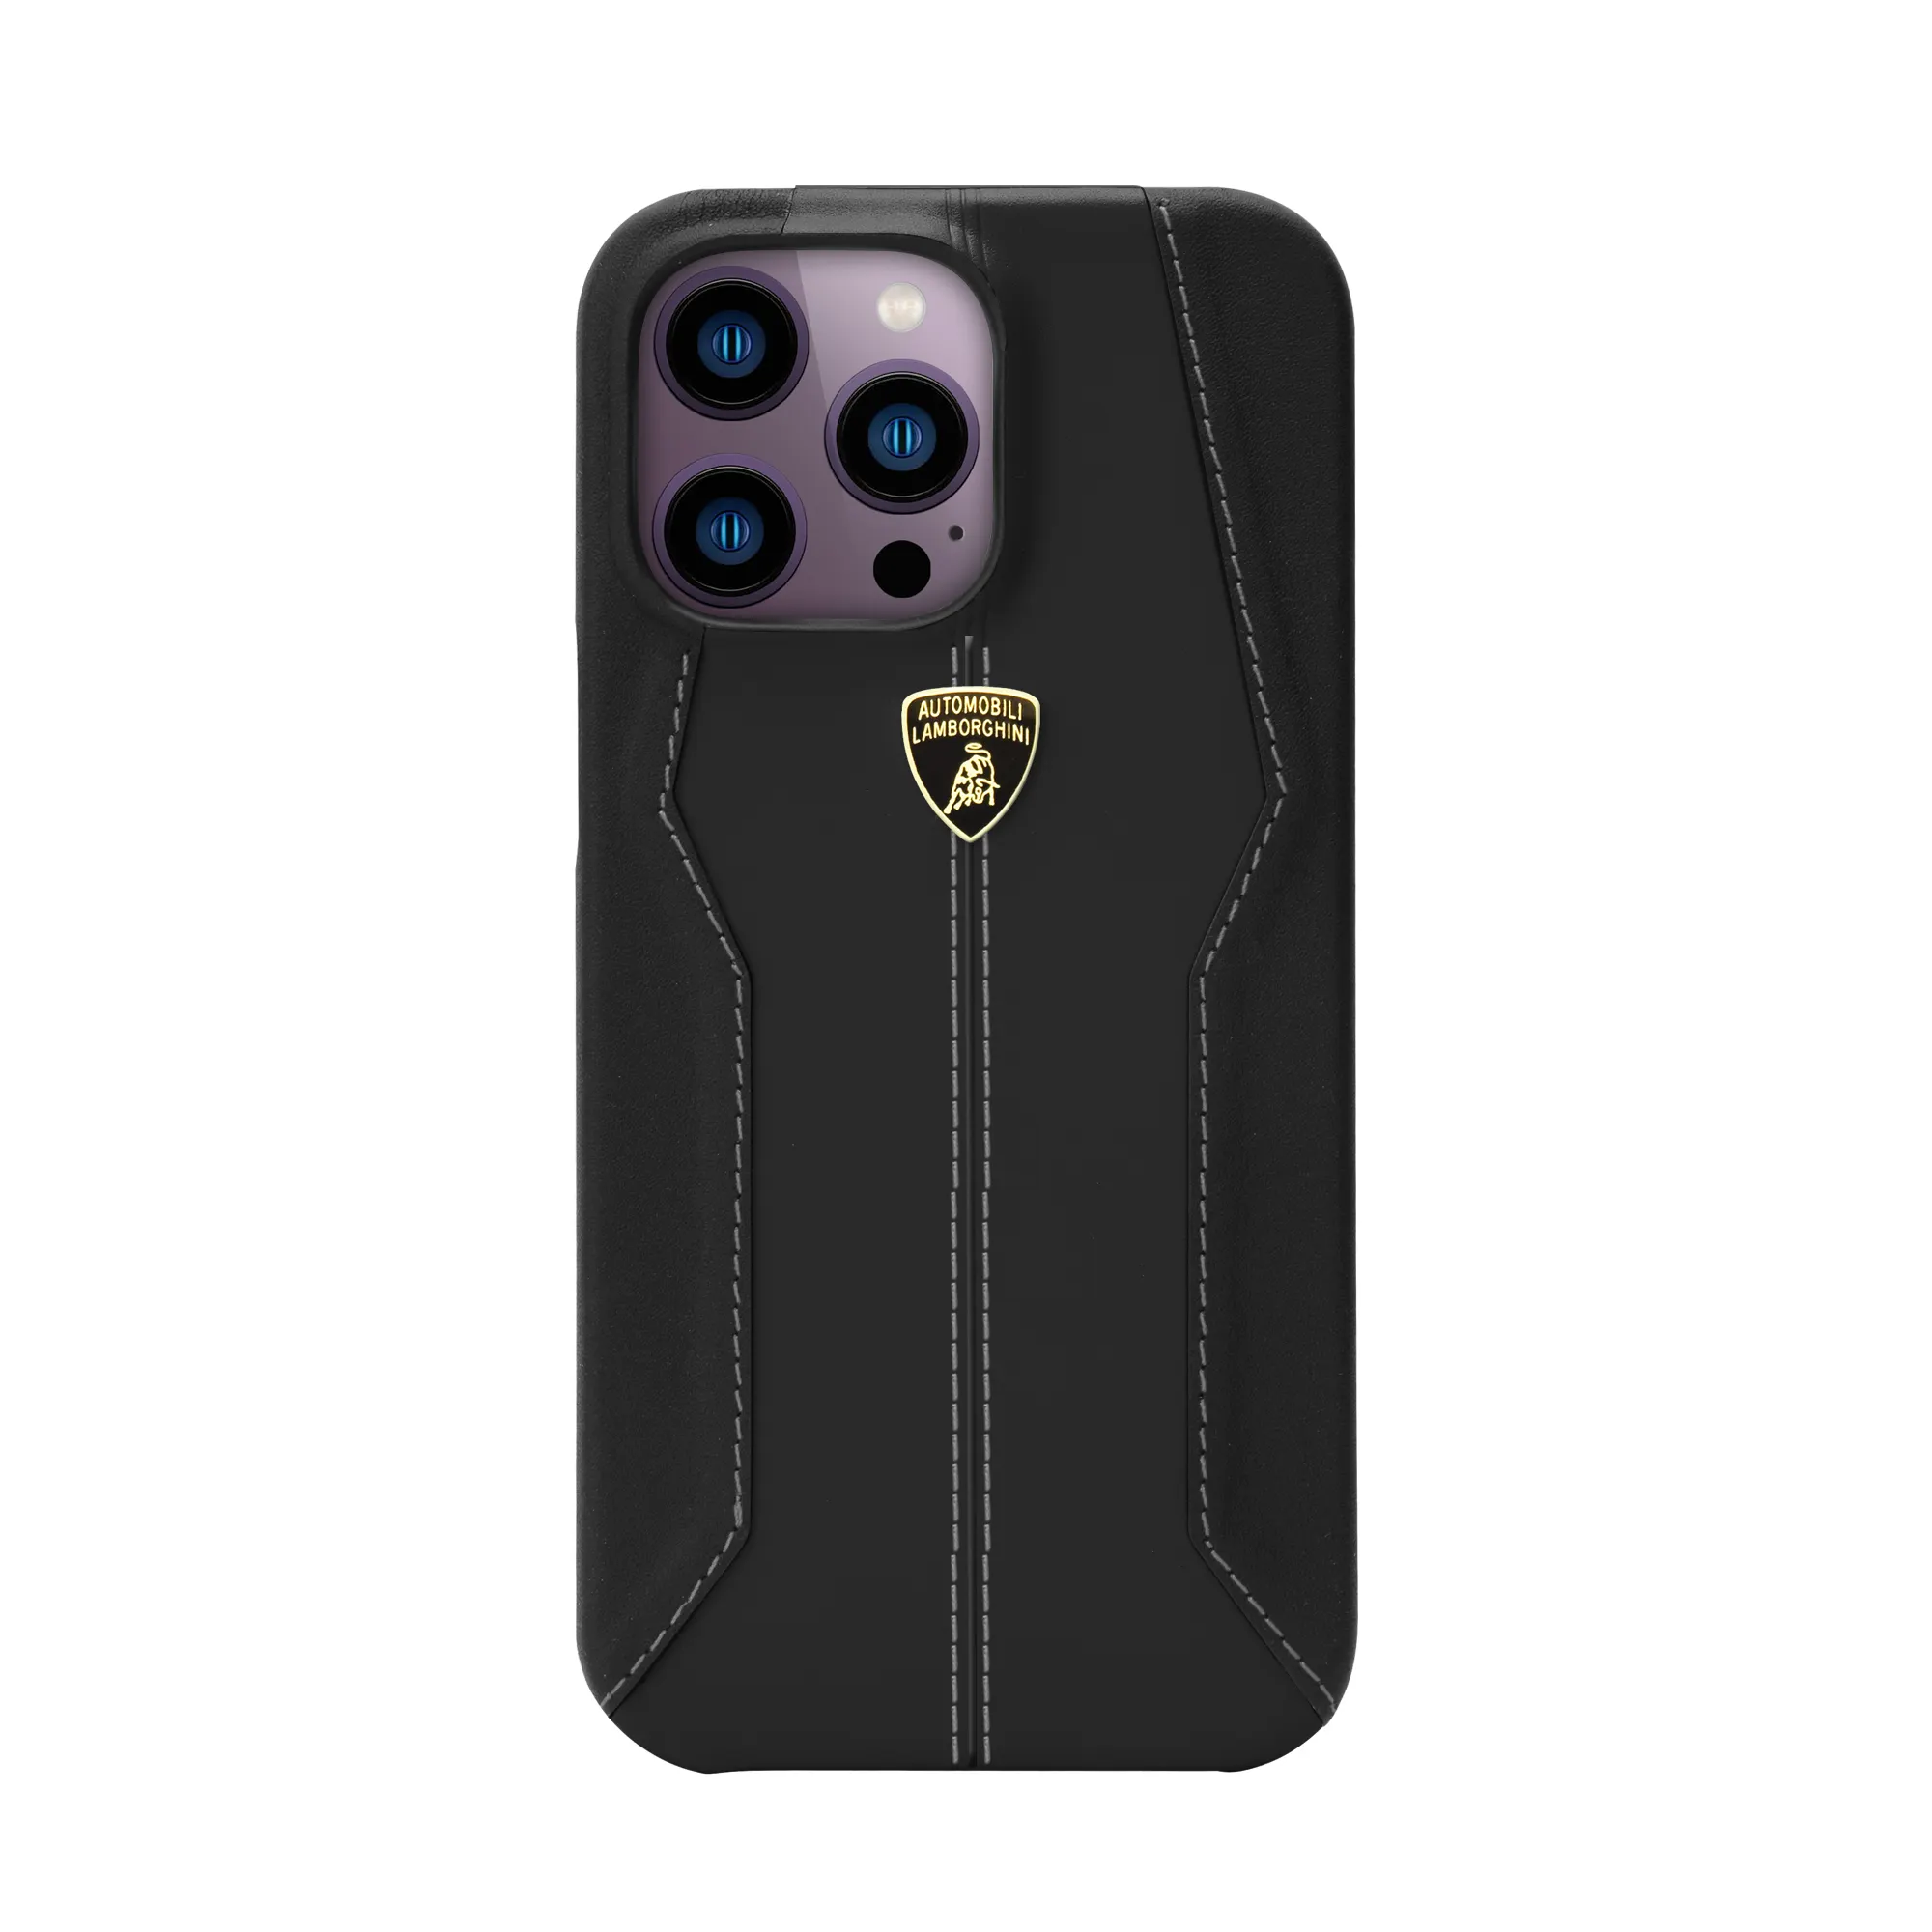 Official licensed Lamborghini Huracan D1 black leather iphone case mobile phone case protective cover for iPhone 14 Pro Max